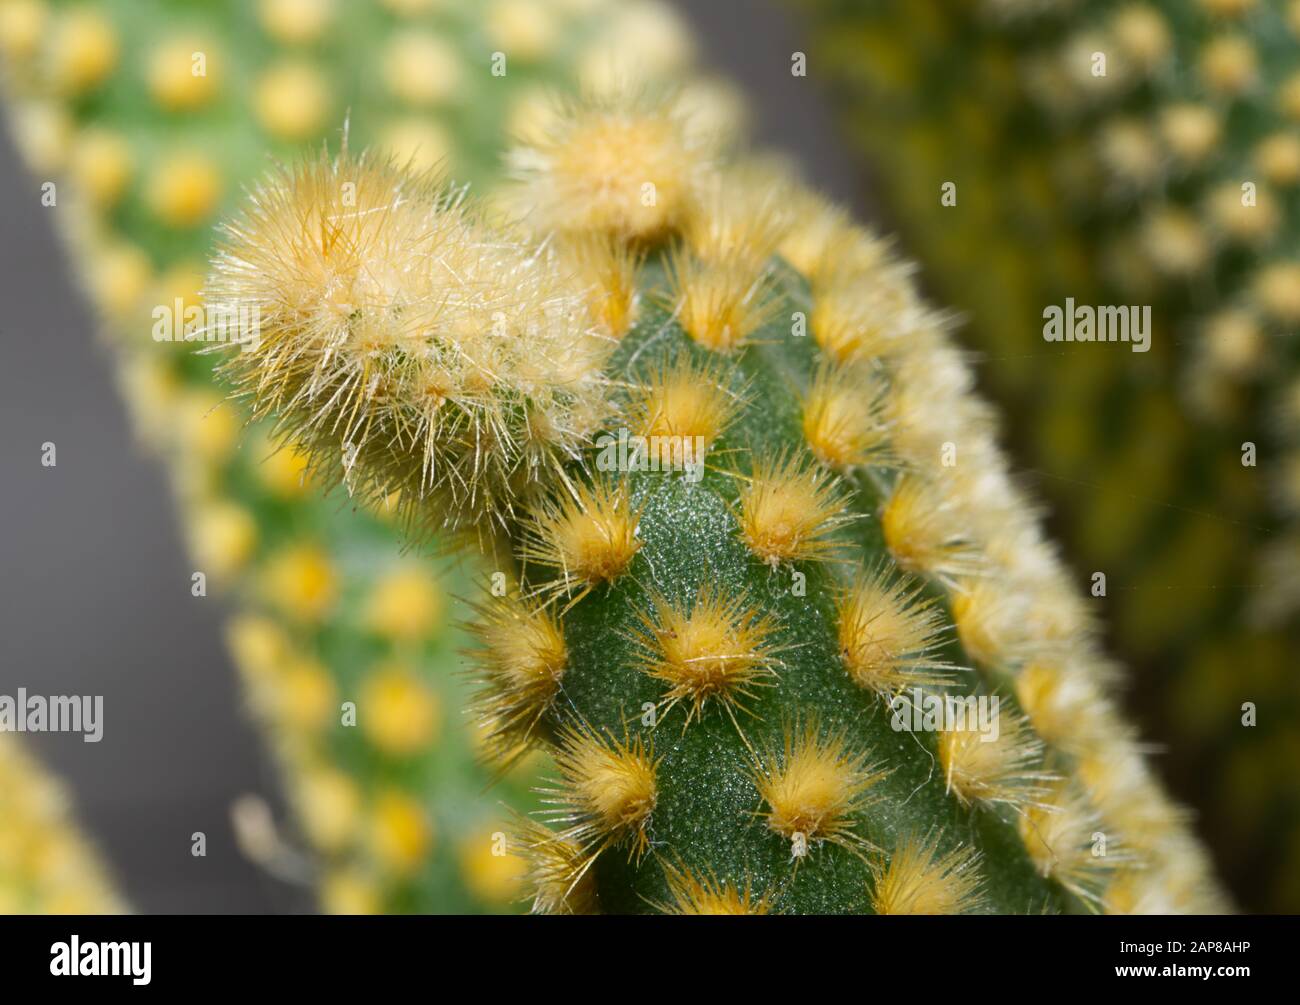 Close up picture of a pricey cactus found on a back patio. Stock Photo